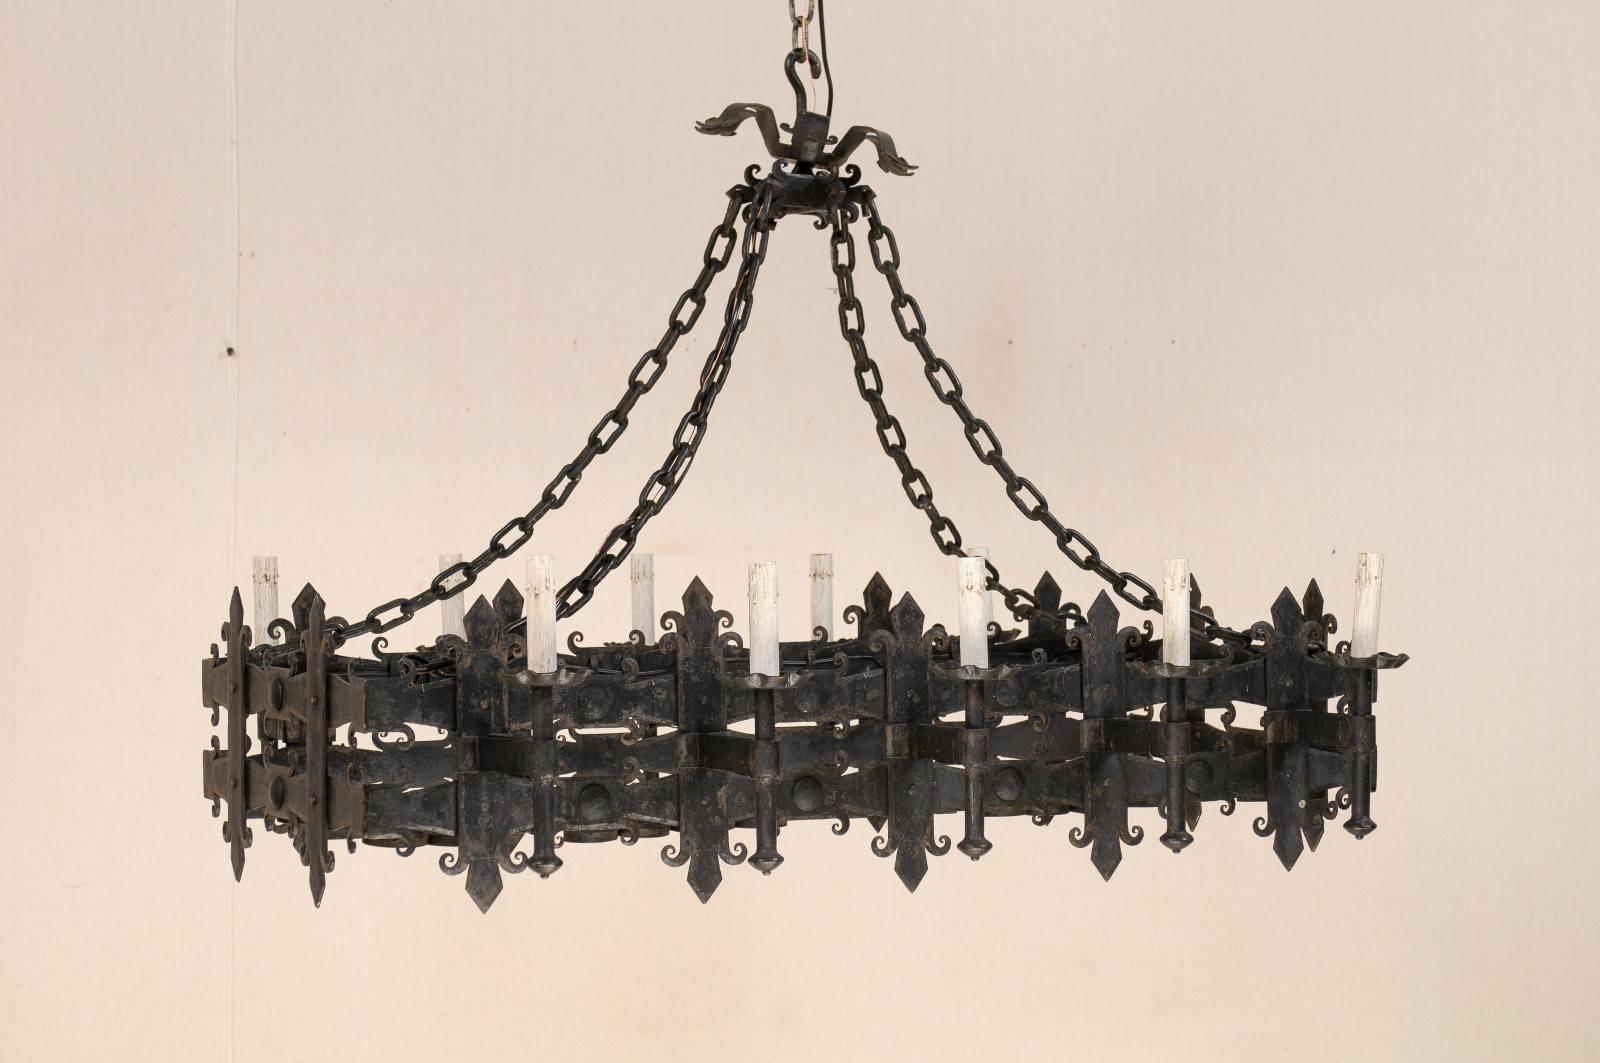 An Italian rectangular shaped forged iron ten-light vintage chandelier. This Italian mid-20th century chandelier features a double banded rectangular centre with vertical posts that have a fleur-de-lys design at each top and bottom. The underside of